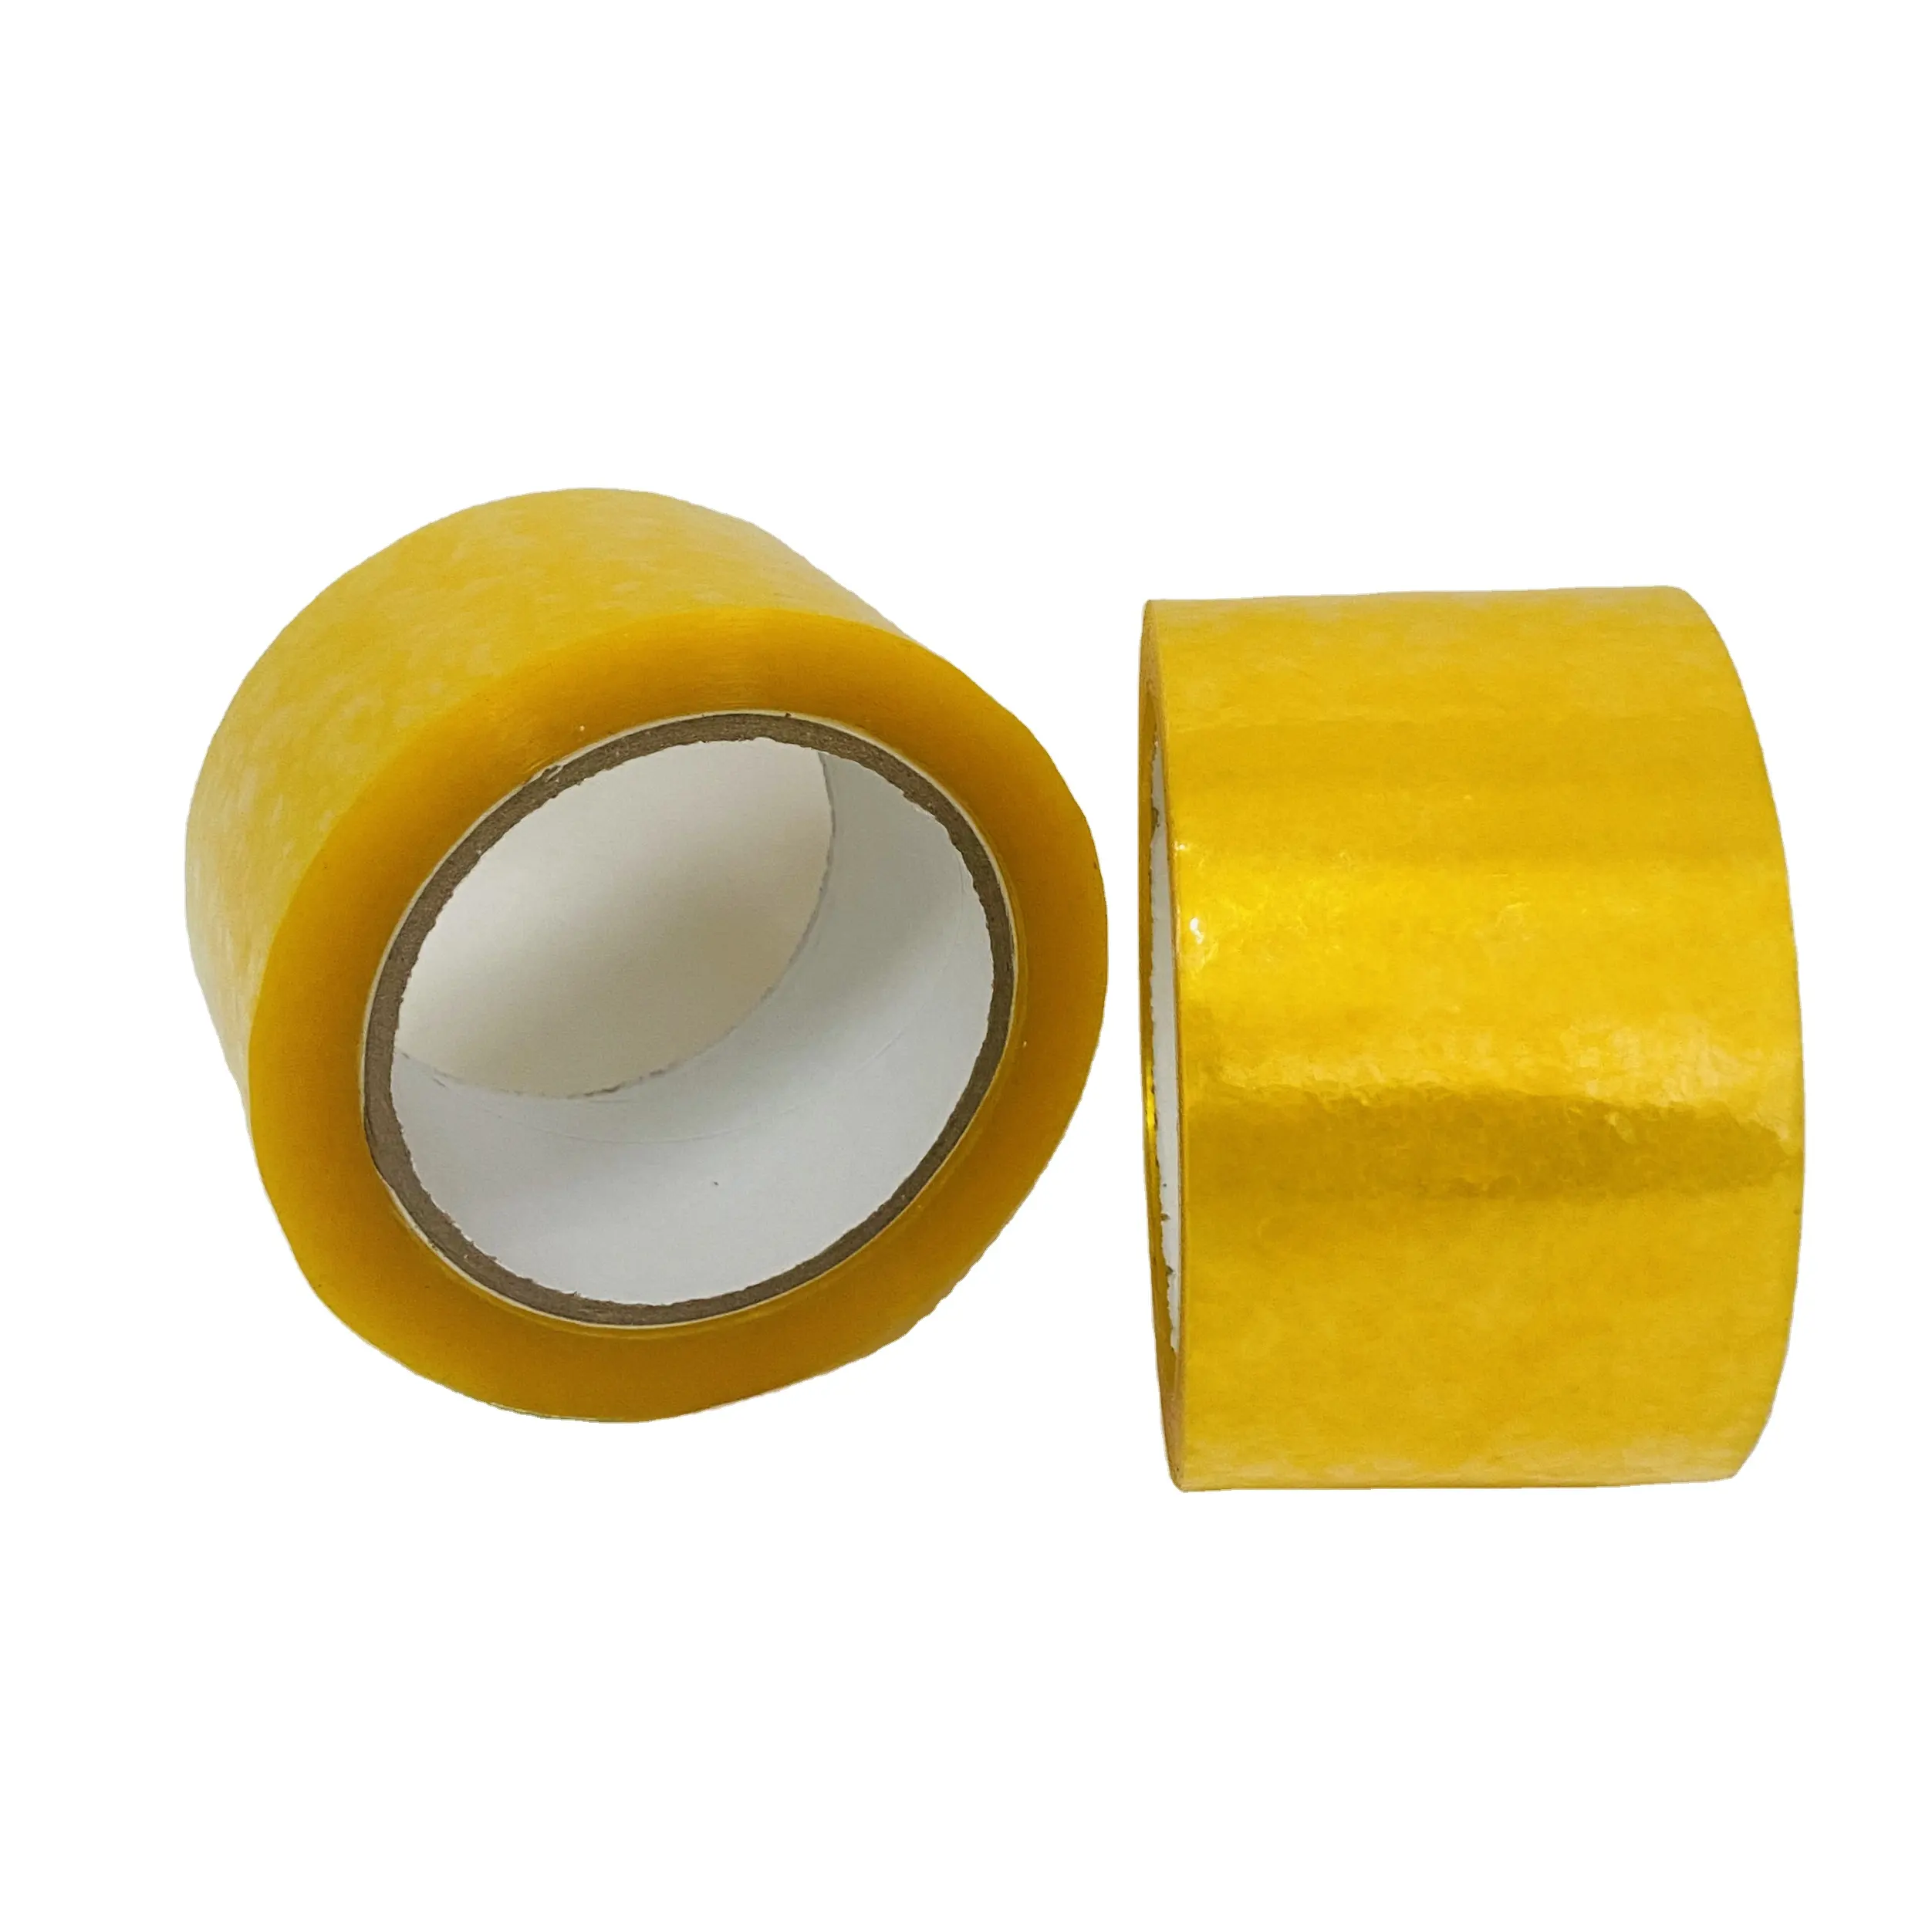 Clear OPP Packing Tape 3 Inch Core 2 Inch Wide 2.0 Mil x 100 Yards Carton Sealing Tape Roll